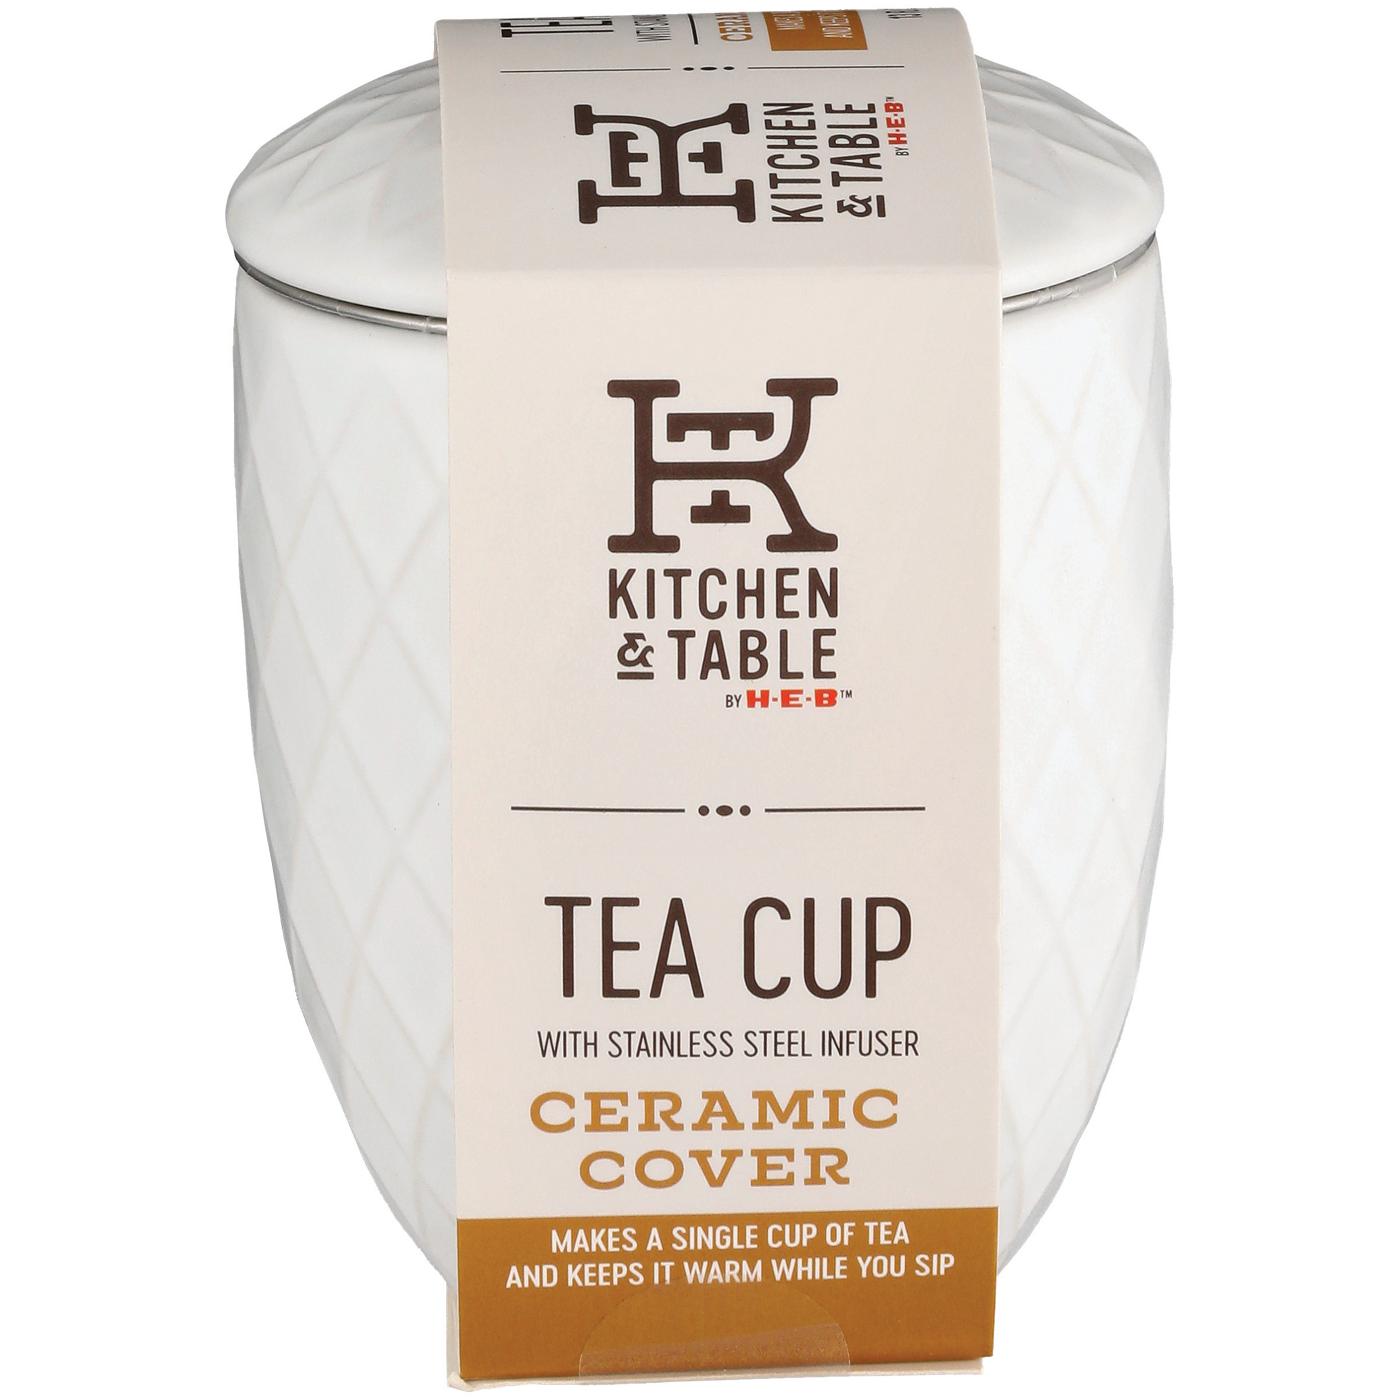 Kitchen & Table by H-E-B Ceramic Tea Cup with Stainless Steel Infuser; image 2 of 2